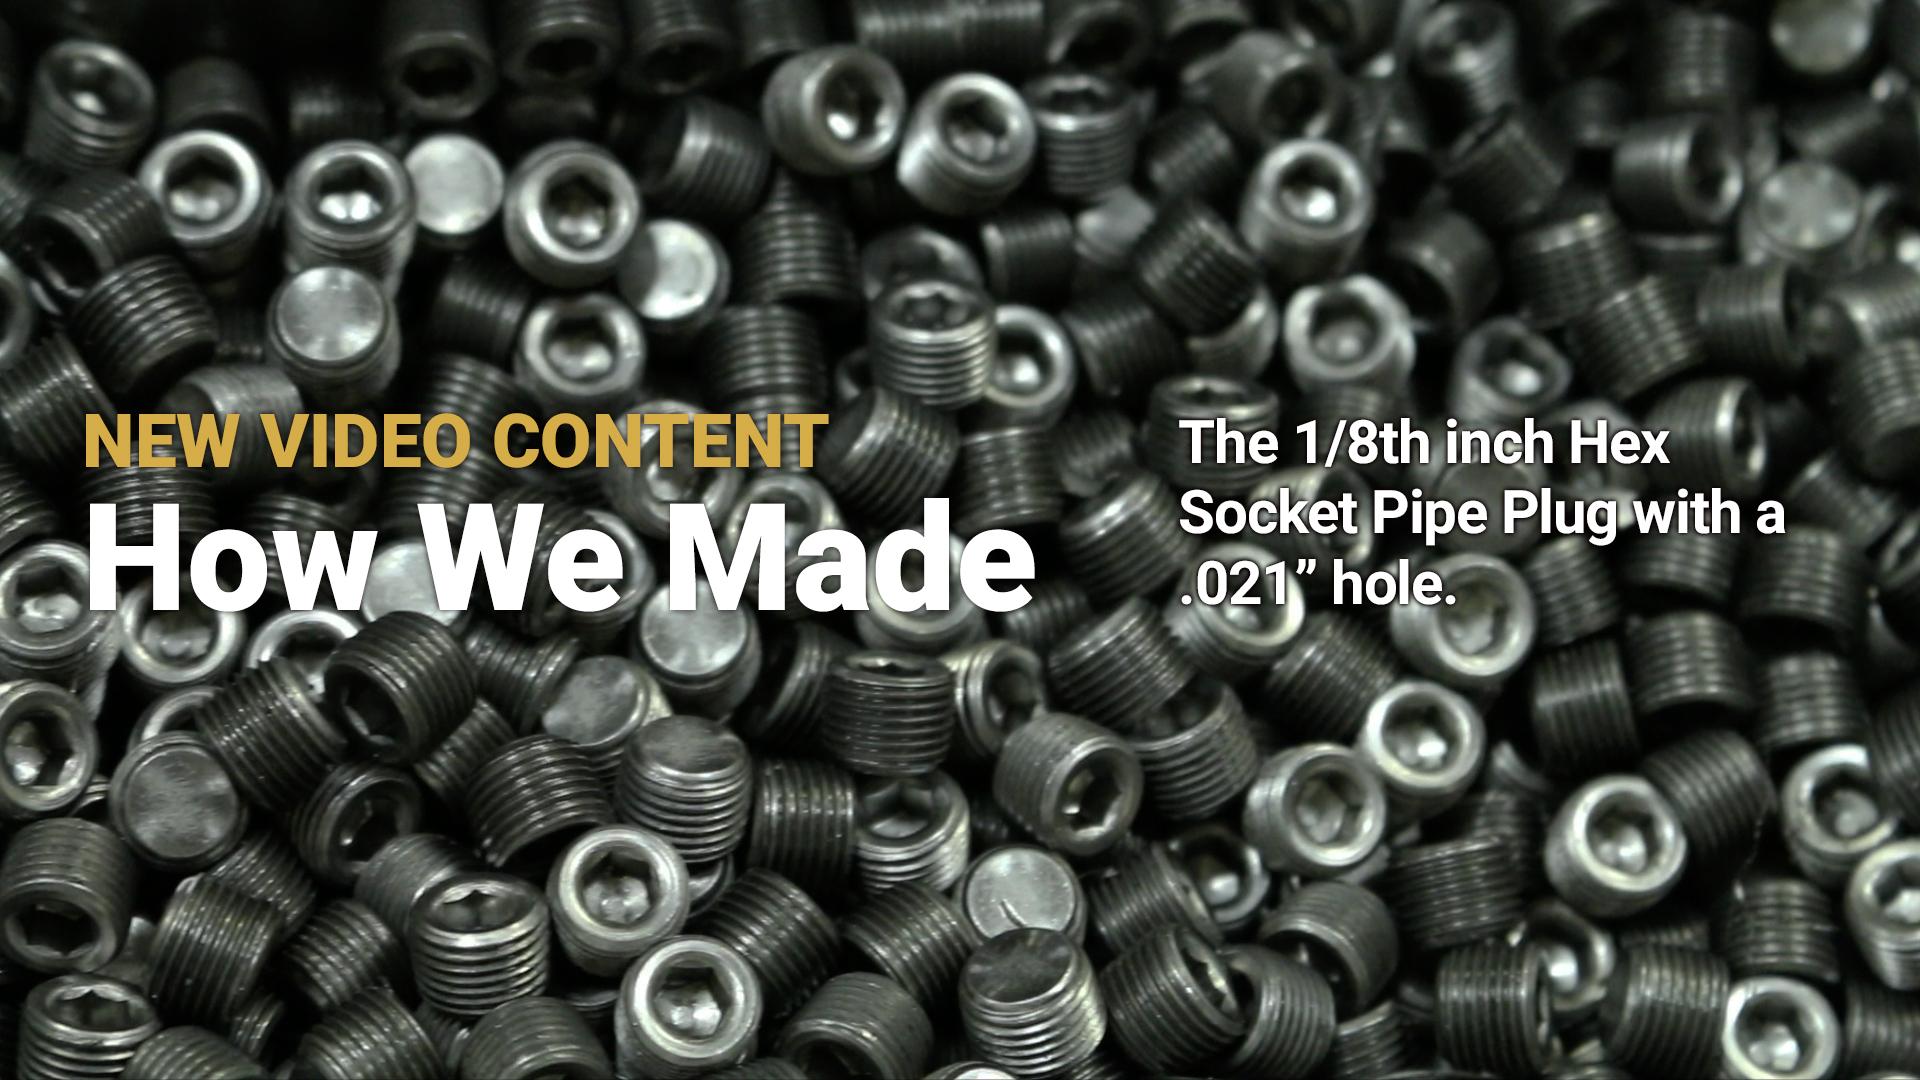 How We Made: .021" Holes in 1/8" Hex Socket Pipe Plugs